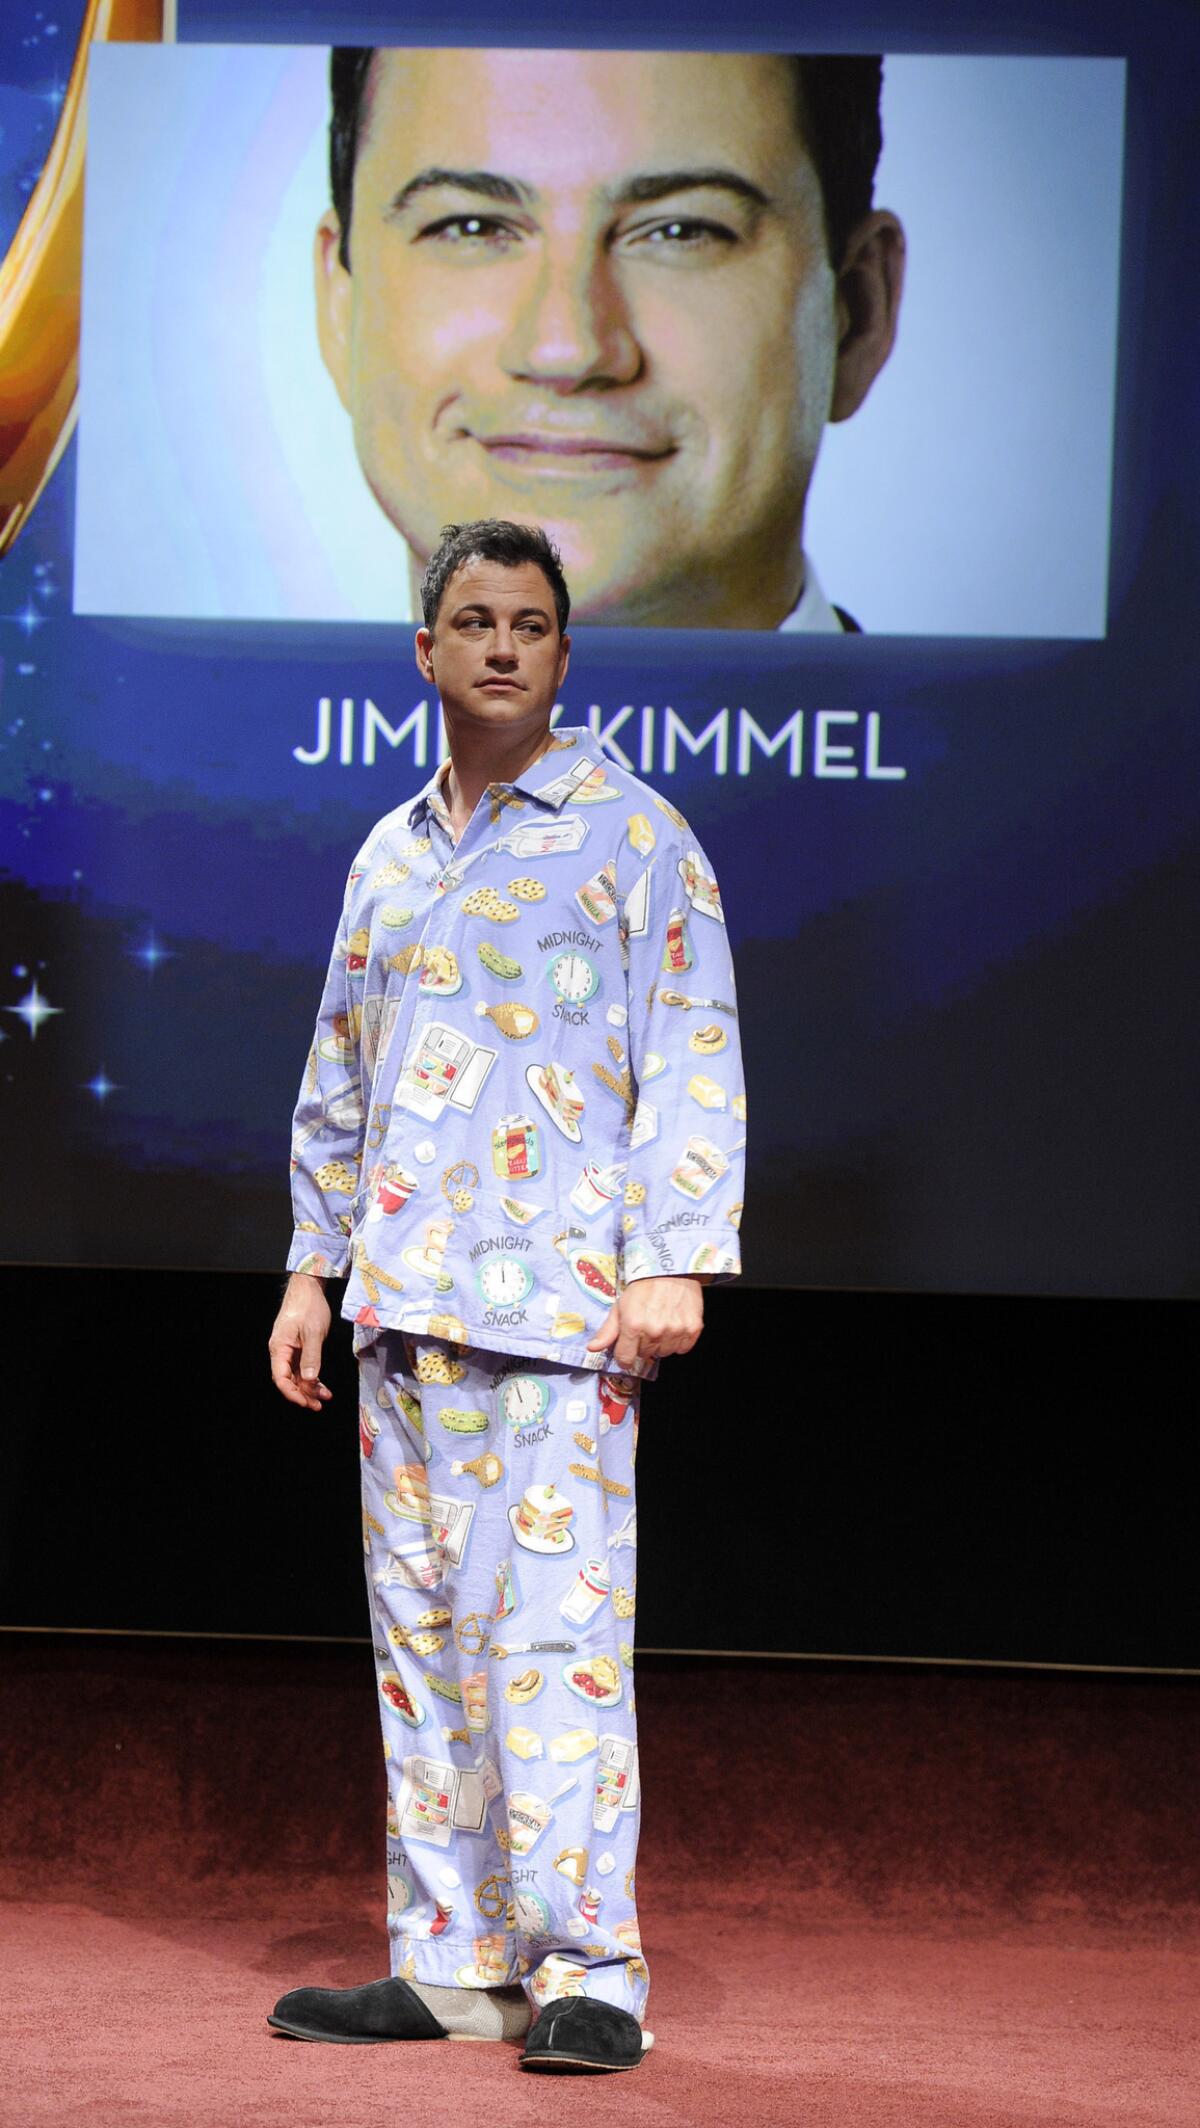 Jimmy Kimmel wore pajamas and slippers to announce the nominations for the Emmy Awards.